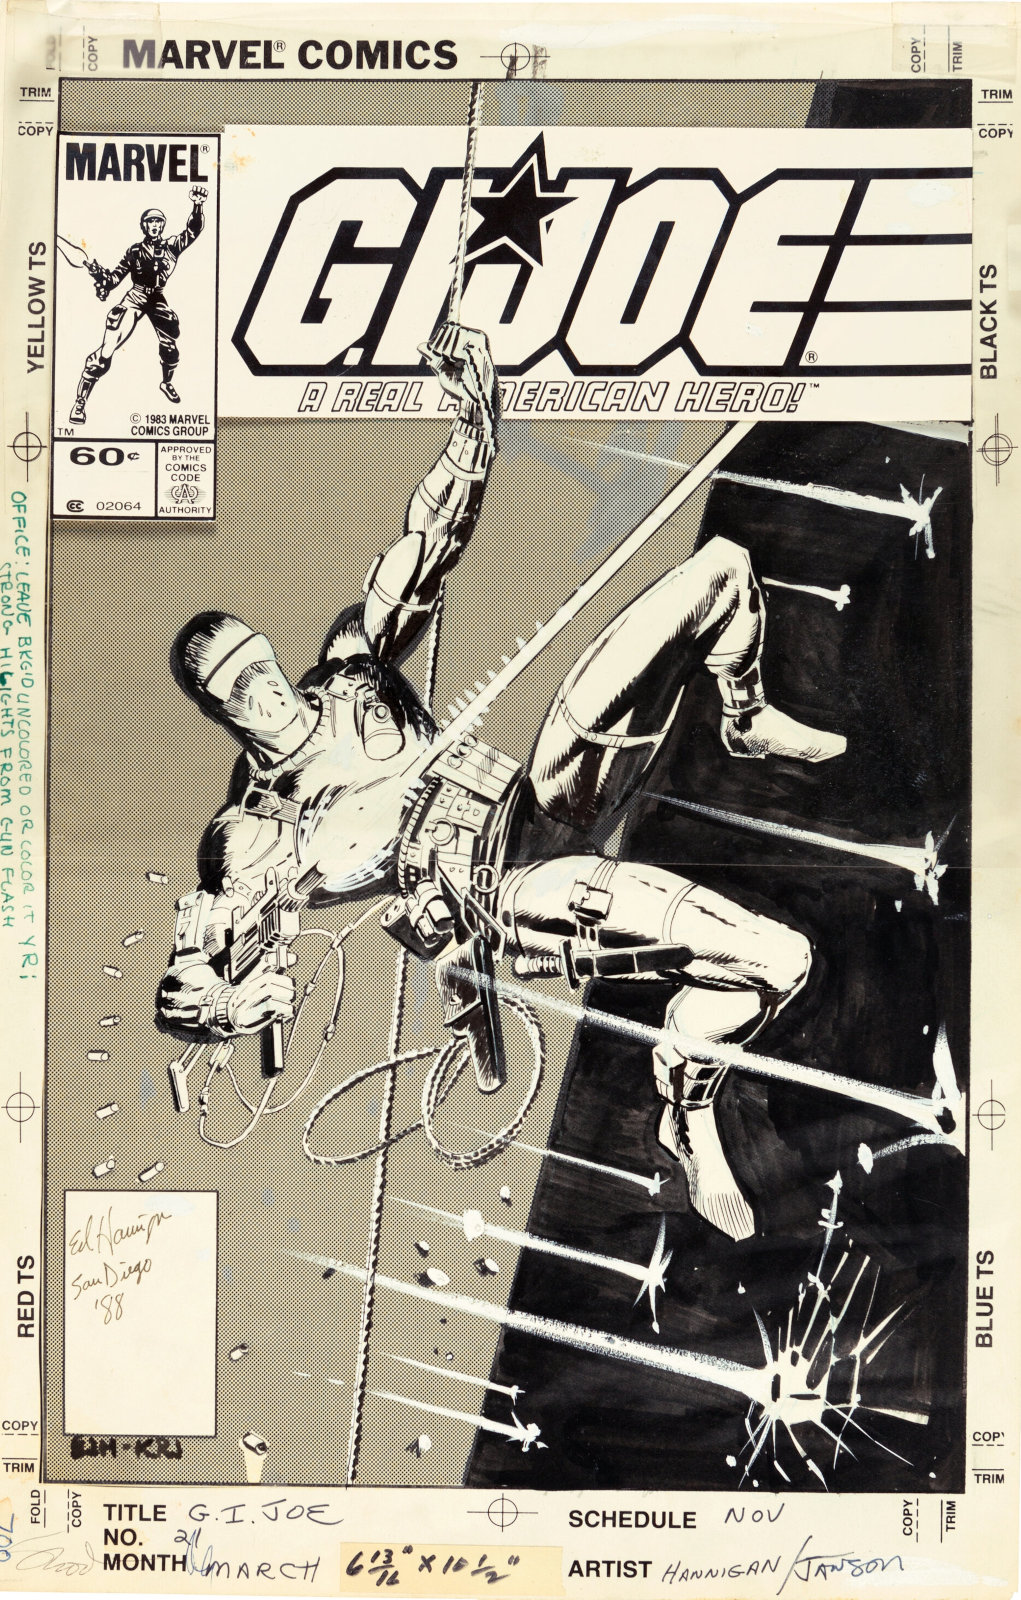 G.I. Joe A Real American Hero issue 21 cover by Ed Hannigan and Klaus Janson